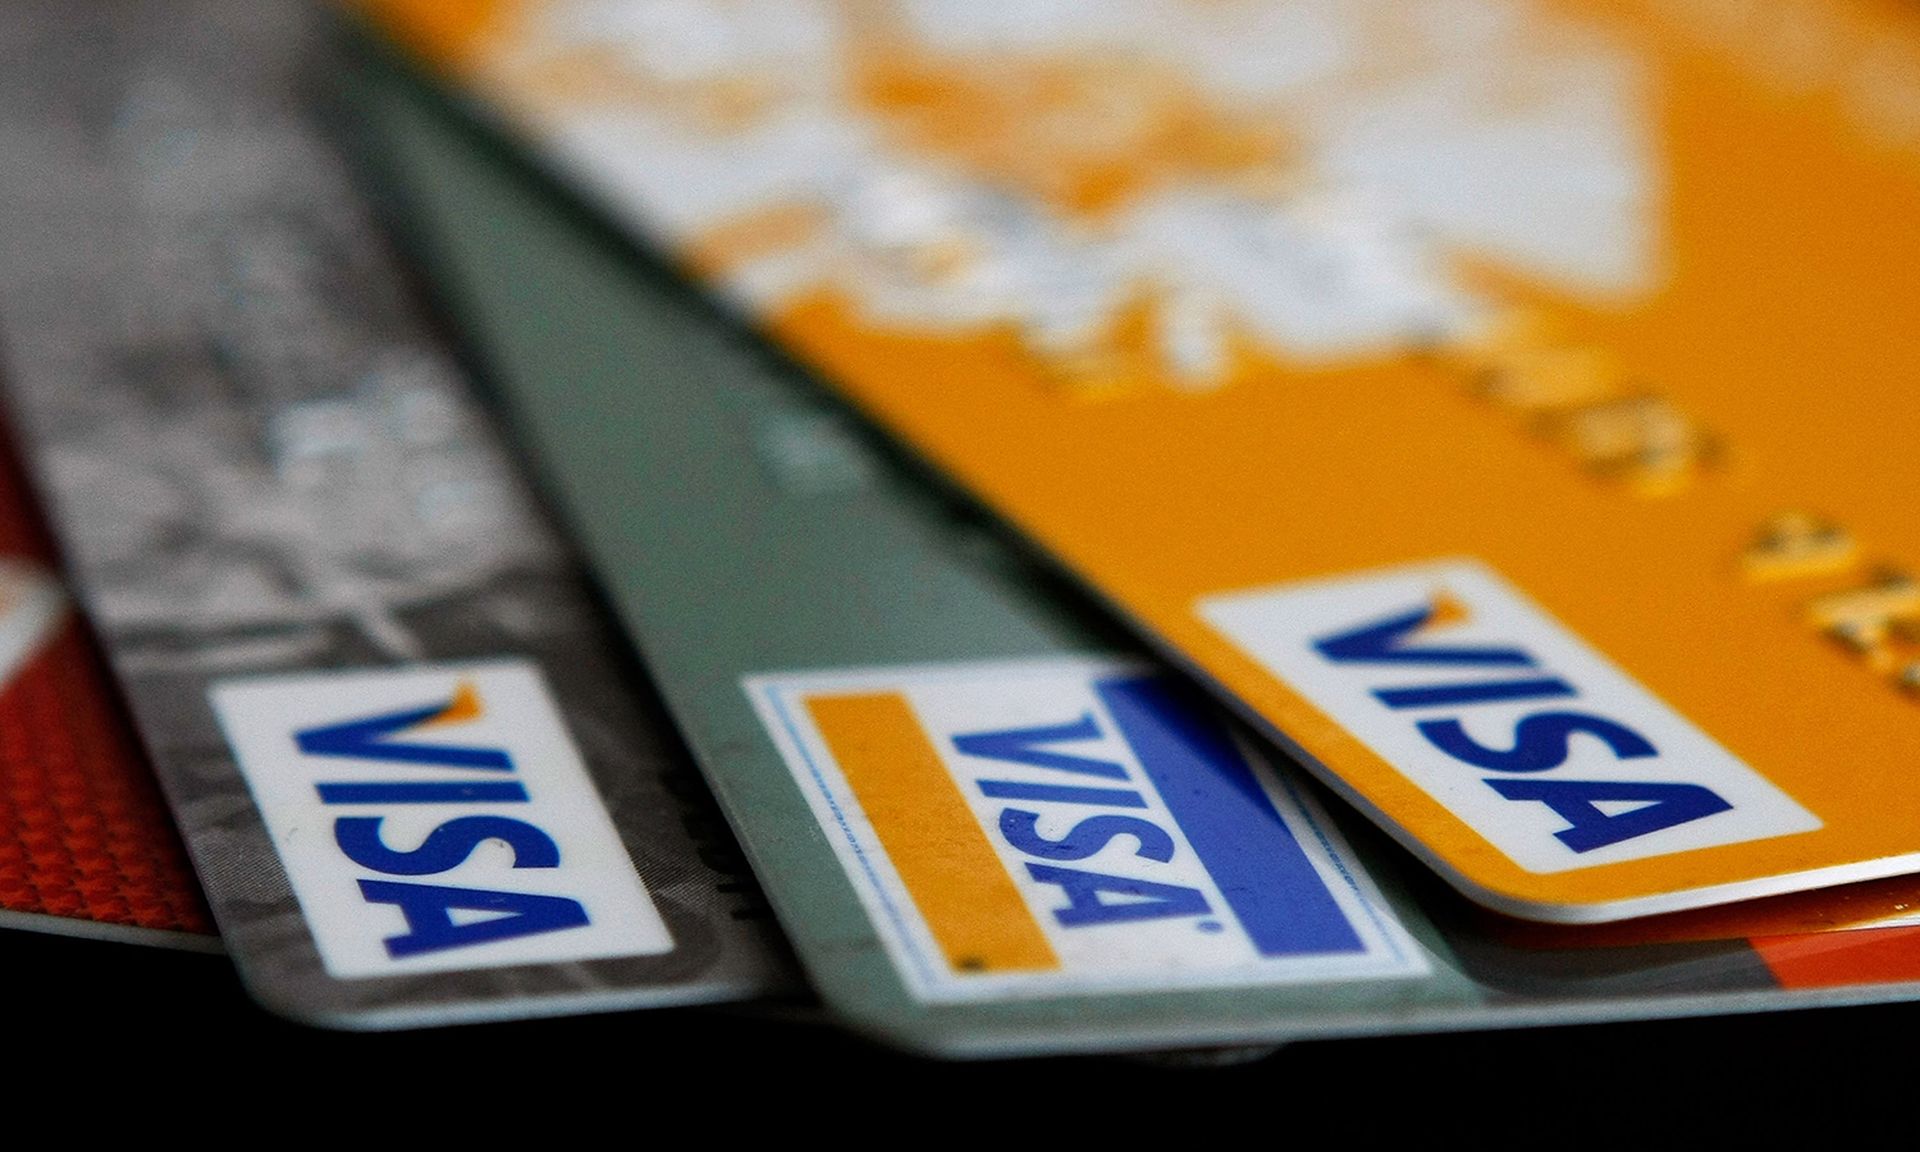 Visa credit cards are arranged on a desk Feb. 25, 2008, in San Francisco. (Photo Illustration by Justin Sullivan/Getty Images)